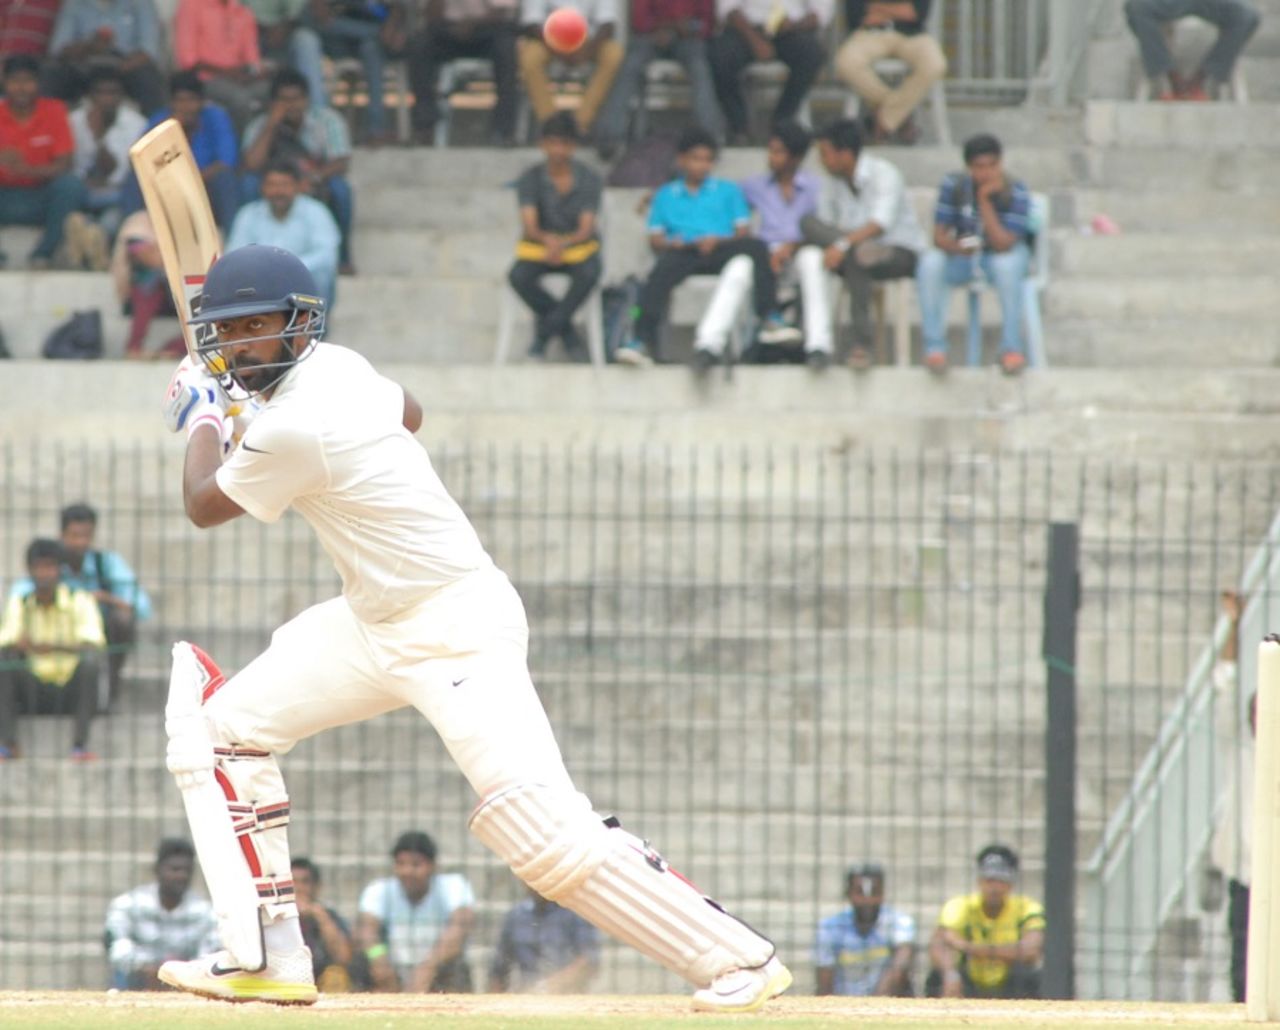 Abhinav Mukund flays the ball through the off side, India A v Australia A, 2nd unofficial Test, Chennai, 3rd day, July 31, 2015